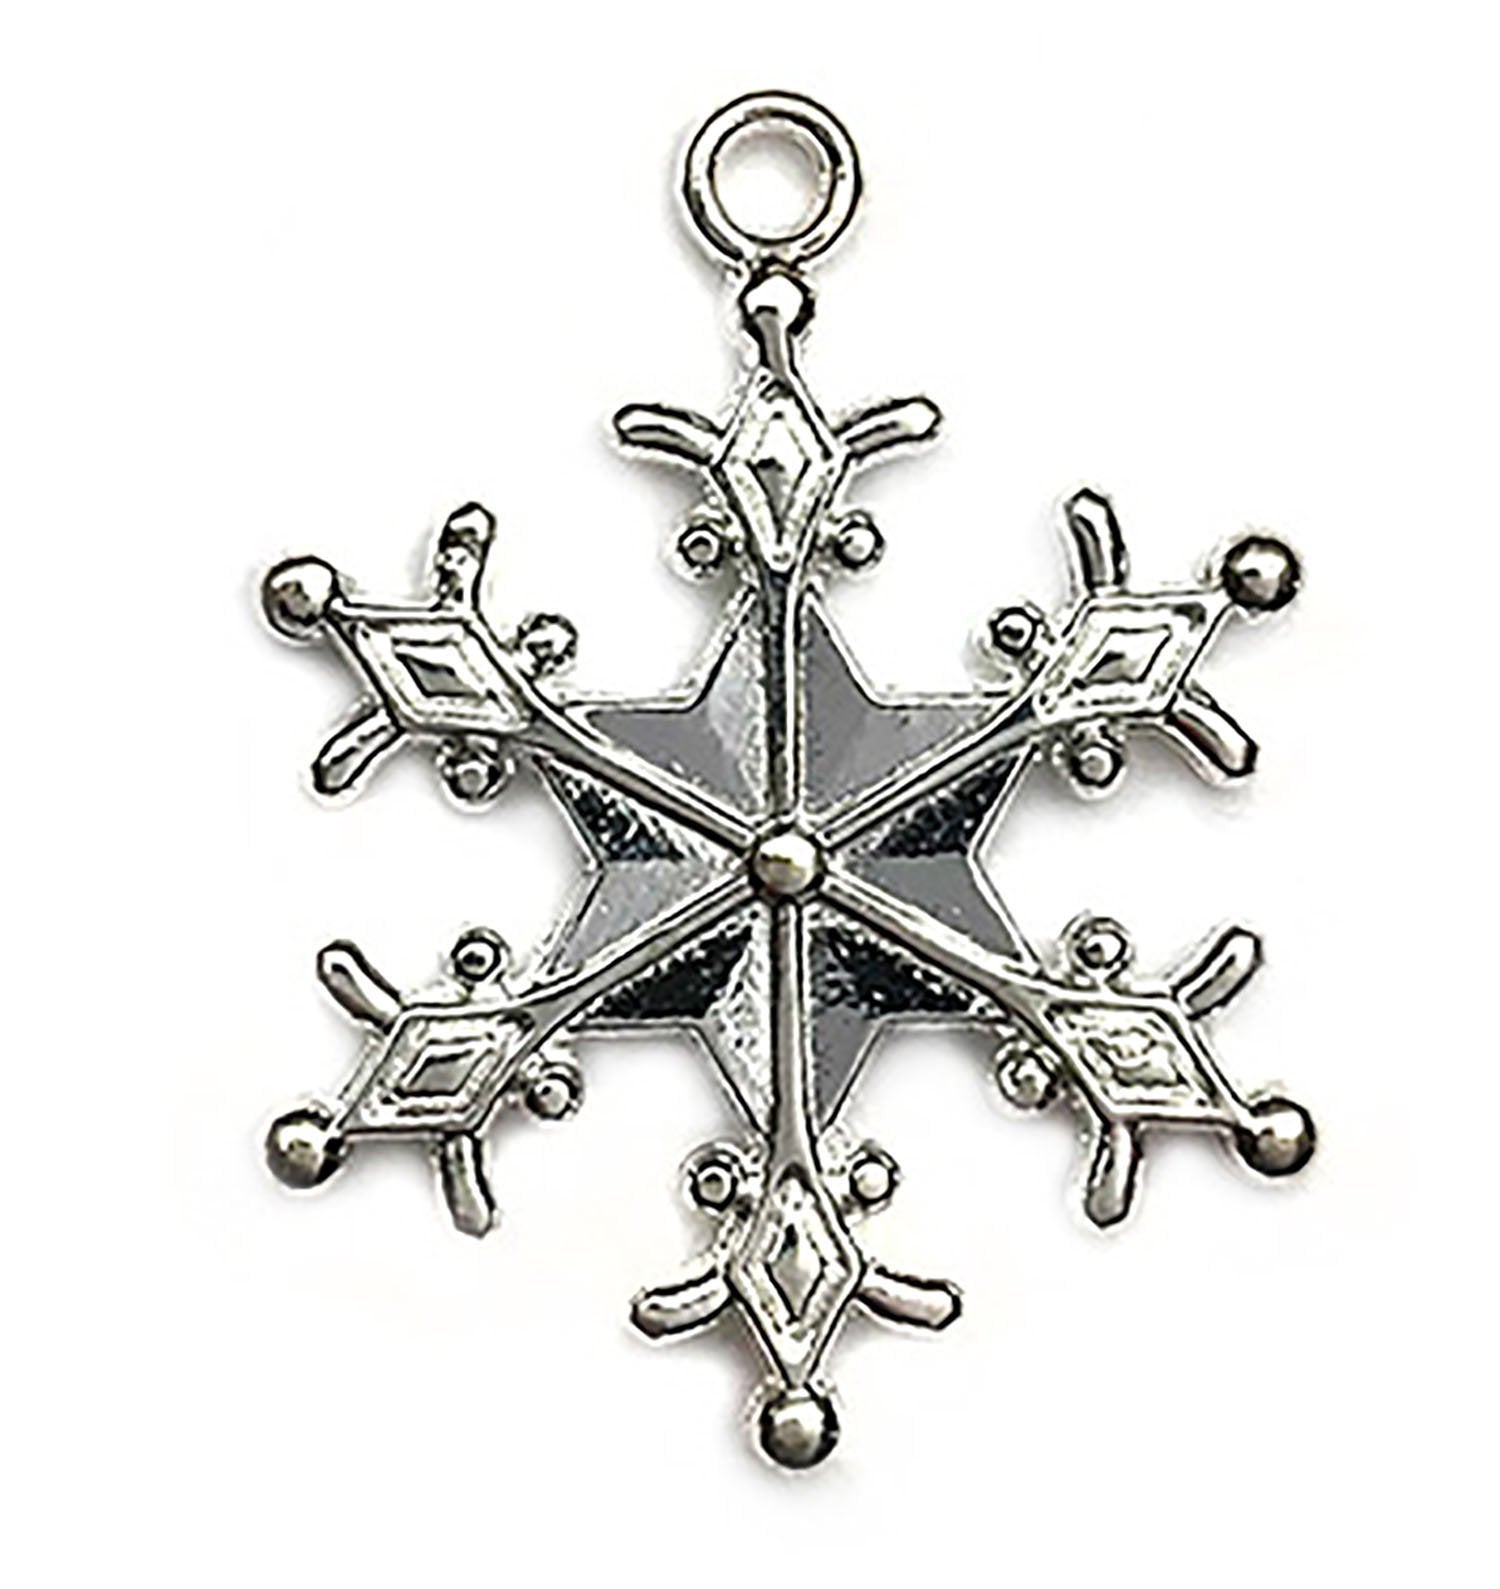 Snowflake Charm - Buttons Galore and More